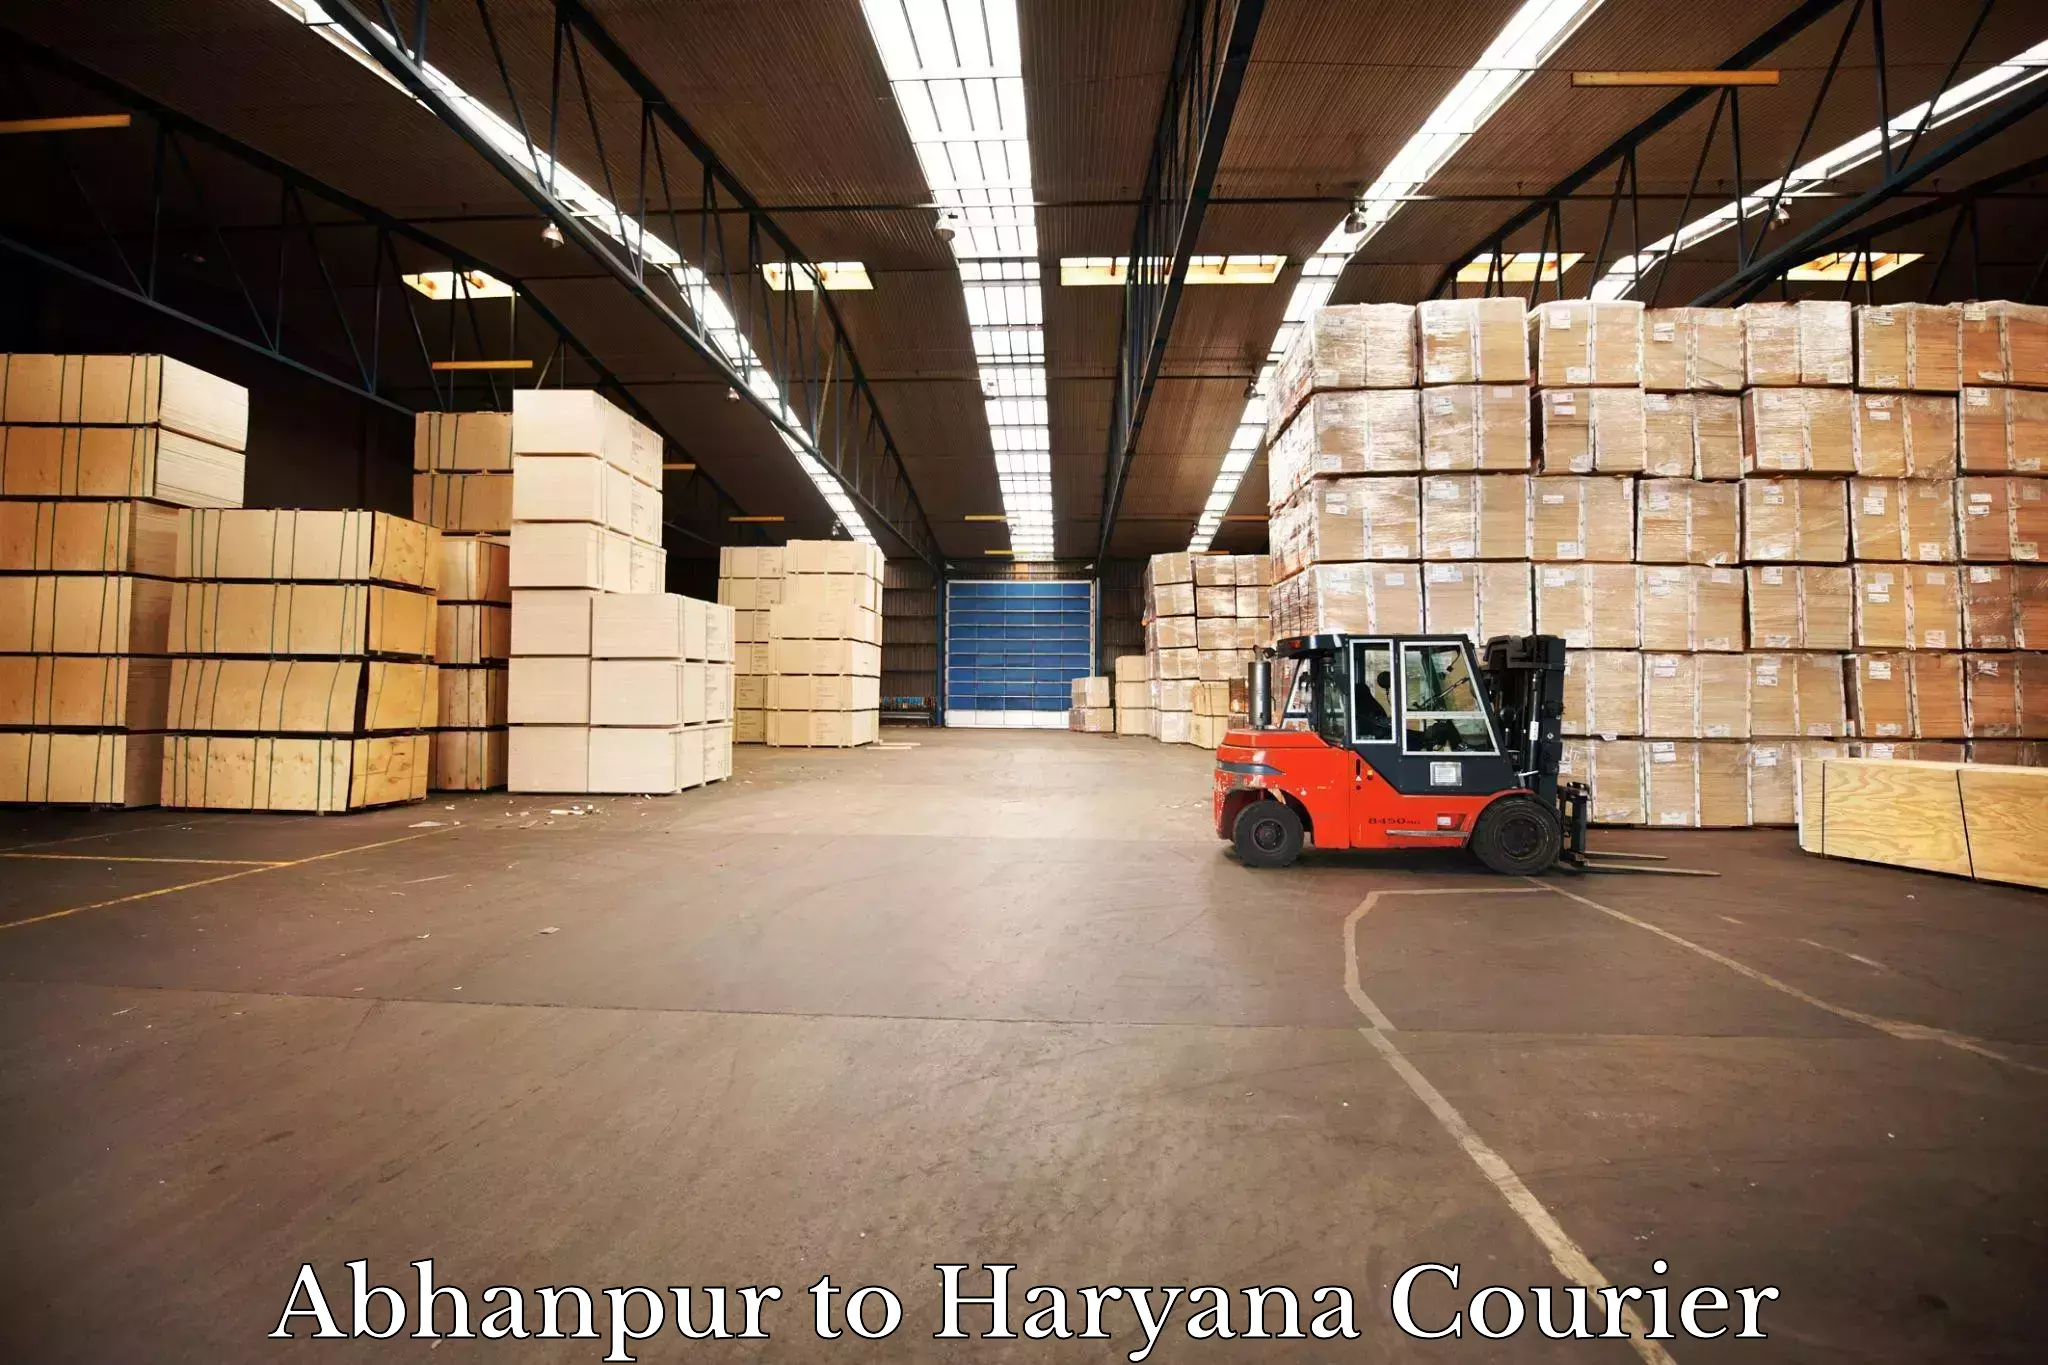 Global shipping solutions in Abhanpur to NCR Haryana